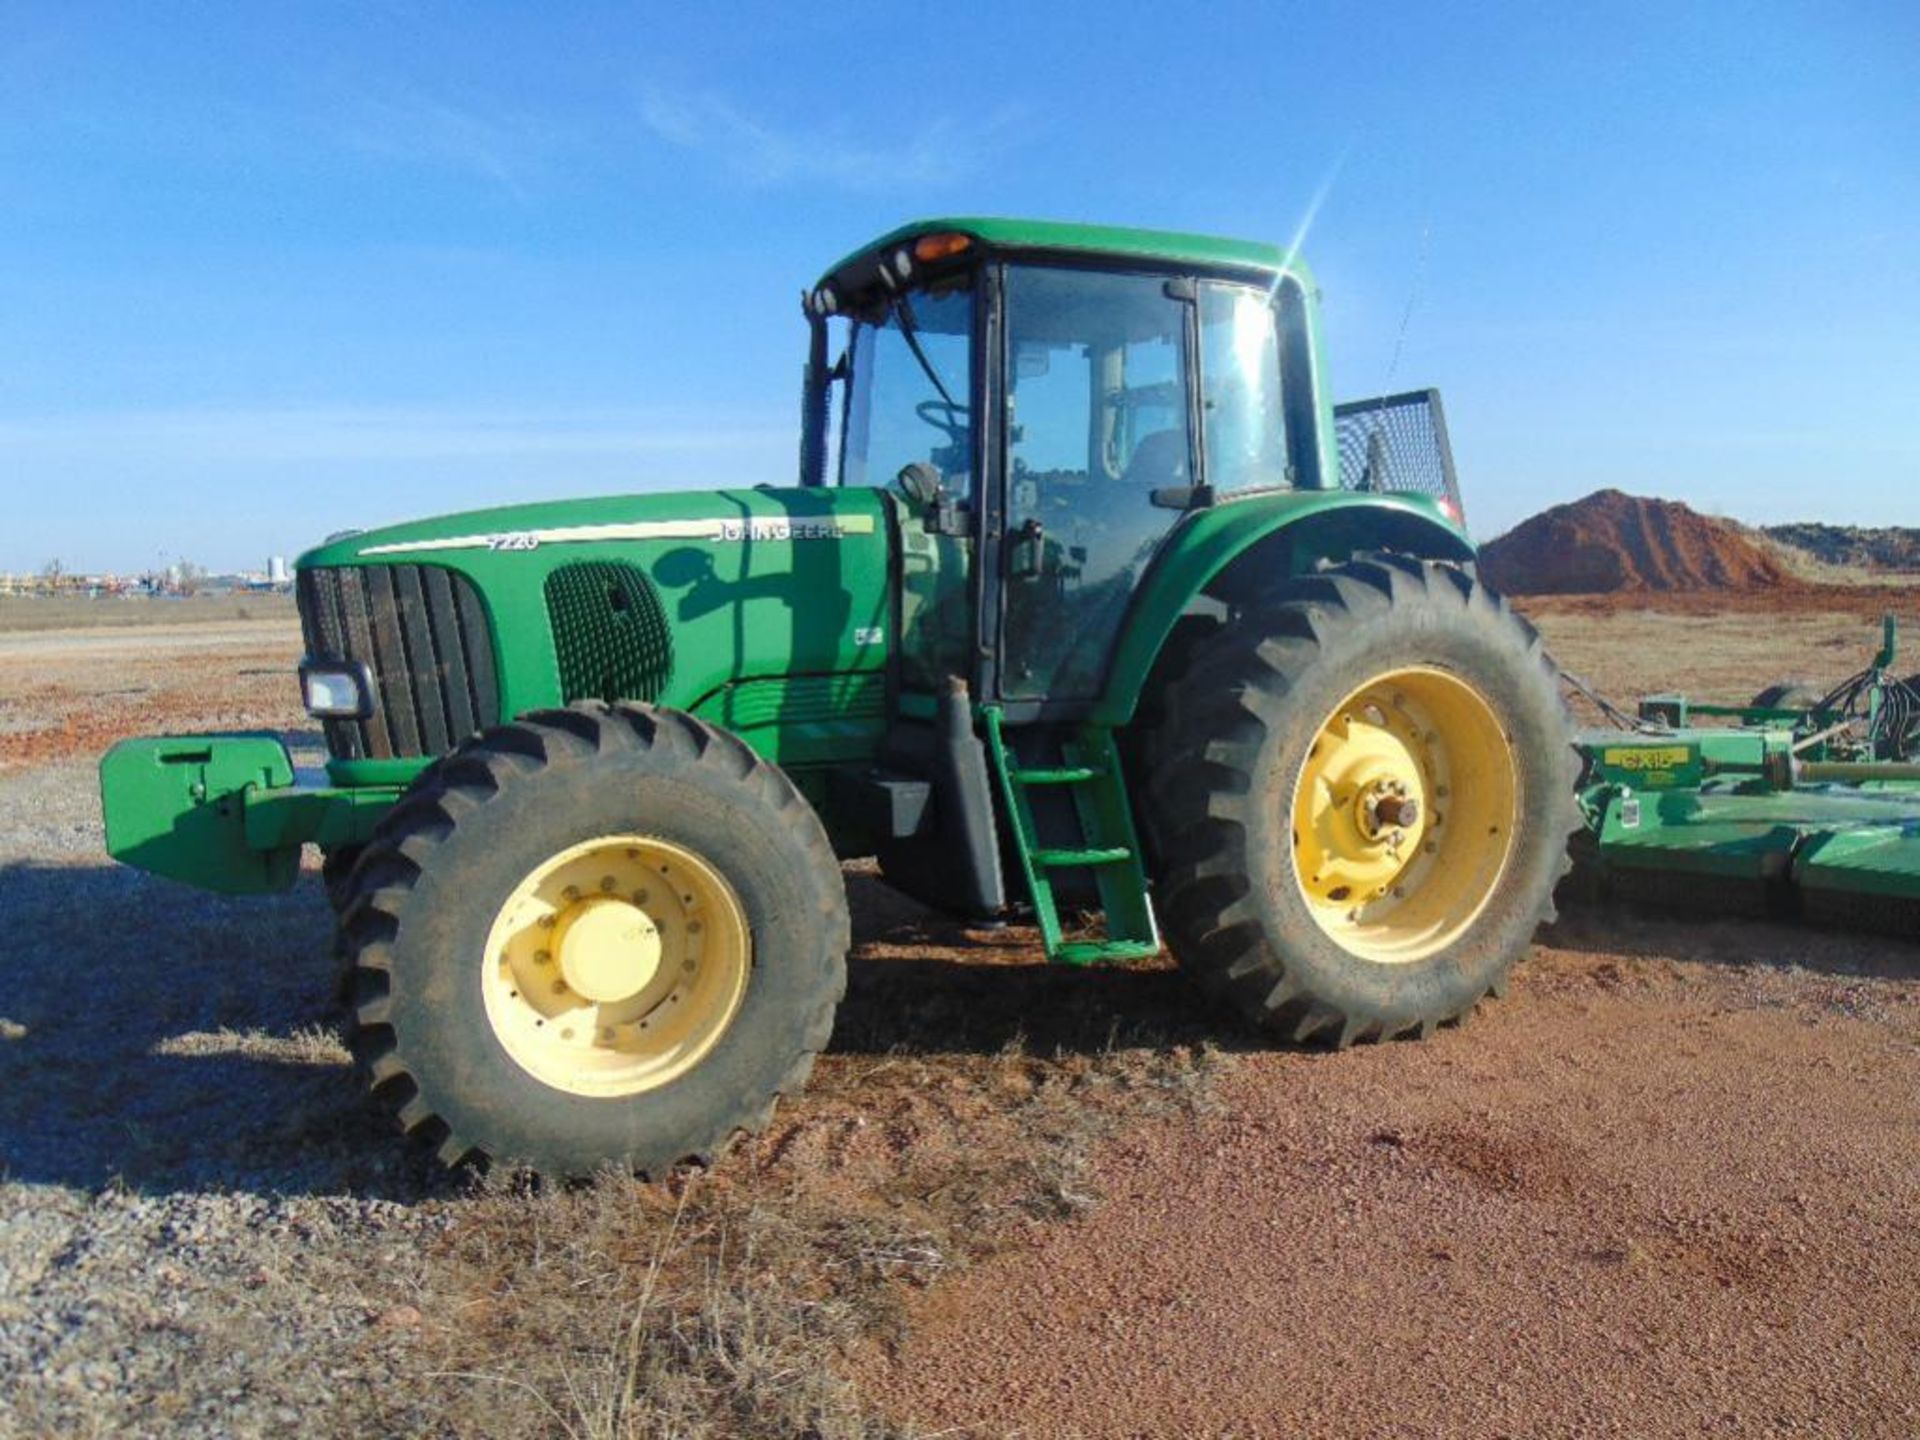 2006 John Deere 7220 MFWD Farm Tractor s/n r047801 Cab,a/c,3pt,hyd outlets